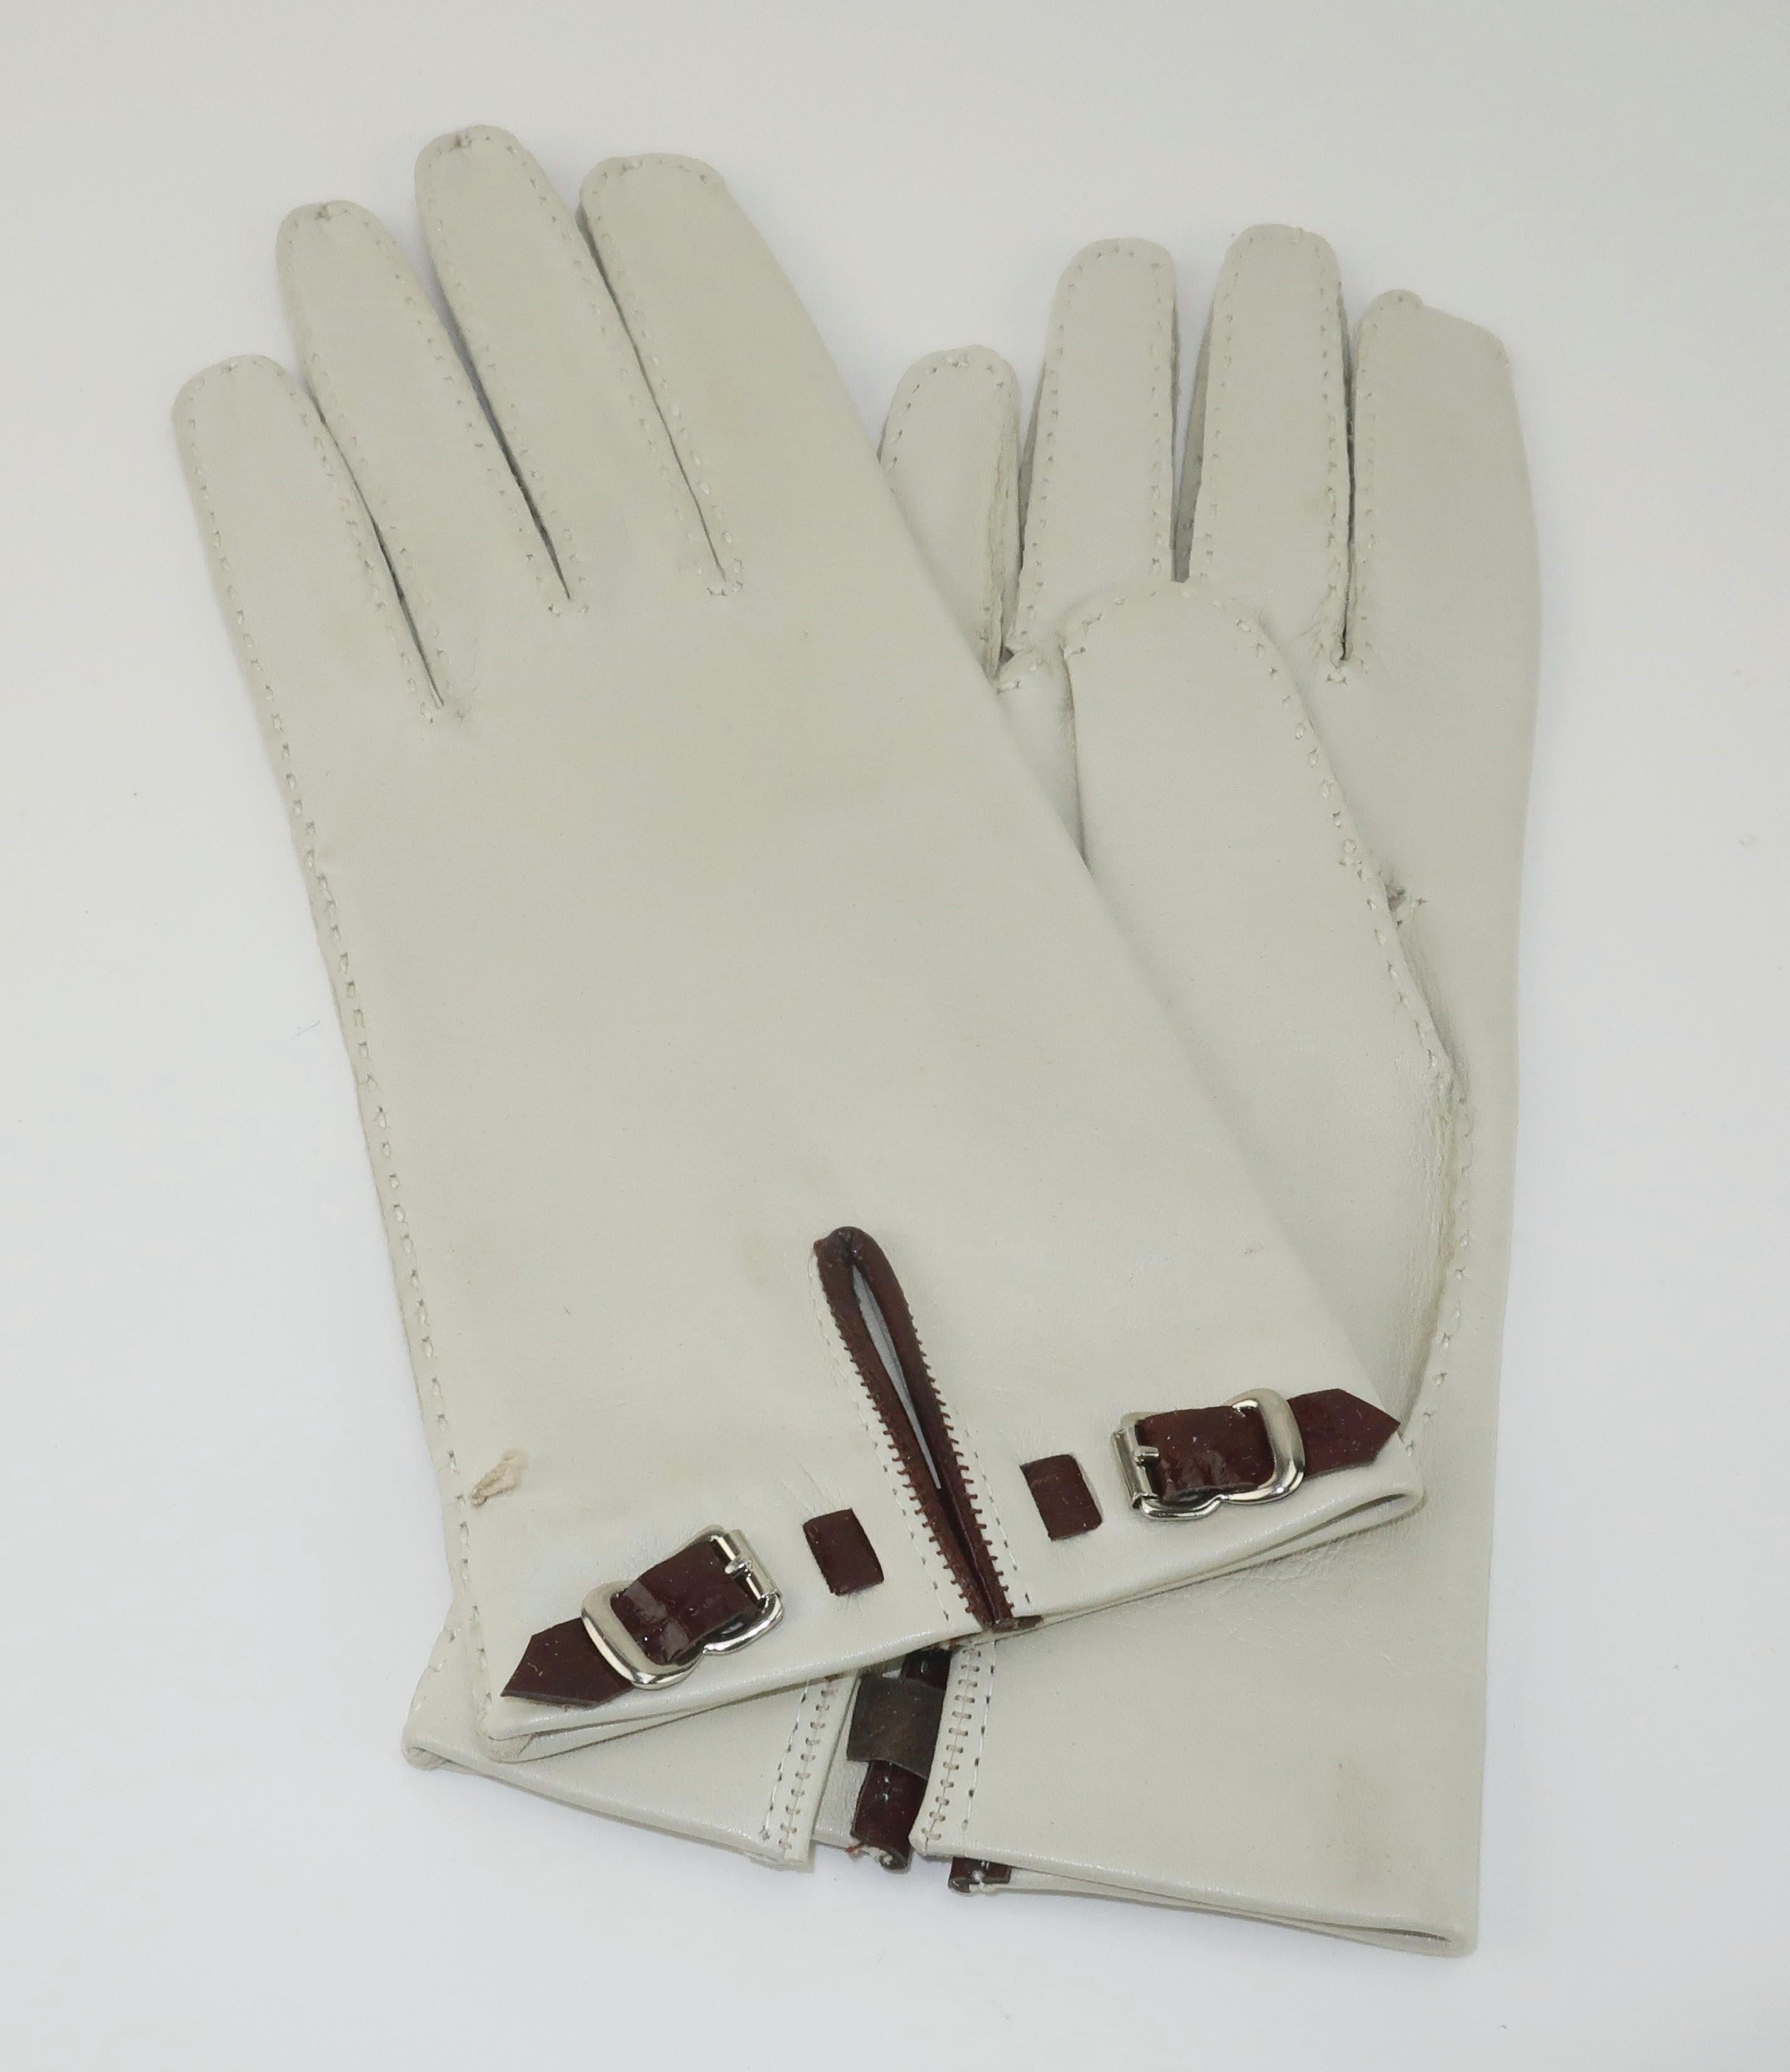 Vintage bone leather gloves with dark burgundy trim and mini faux buckles at the cuffs. The gloves were previously owned though never worn. Marked a size 6 1/2 with no designer label. Beautiful supple leather ... like butter!

Marked 6 1/2 and fits